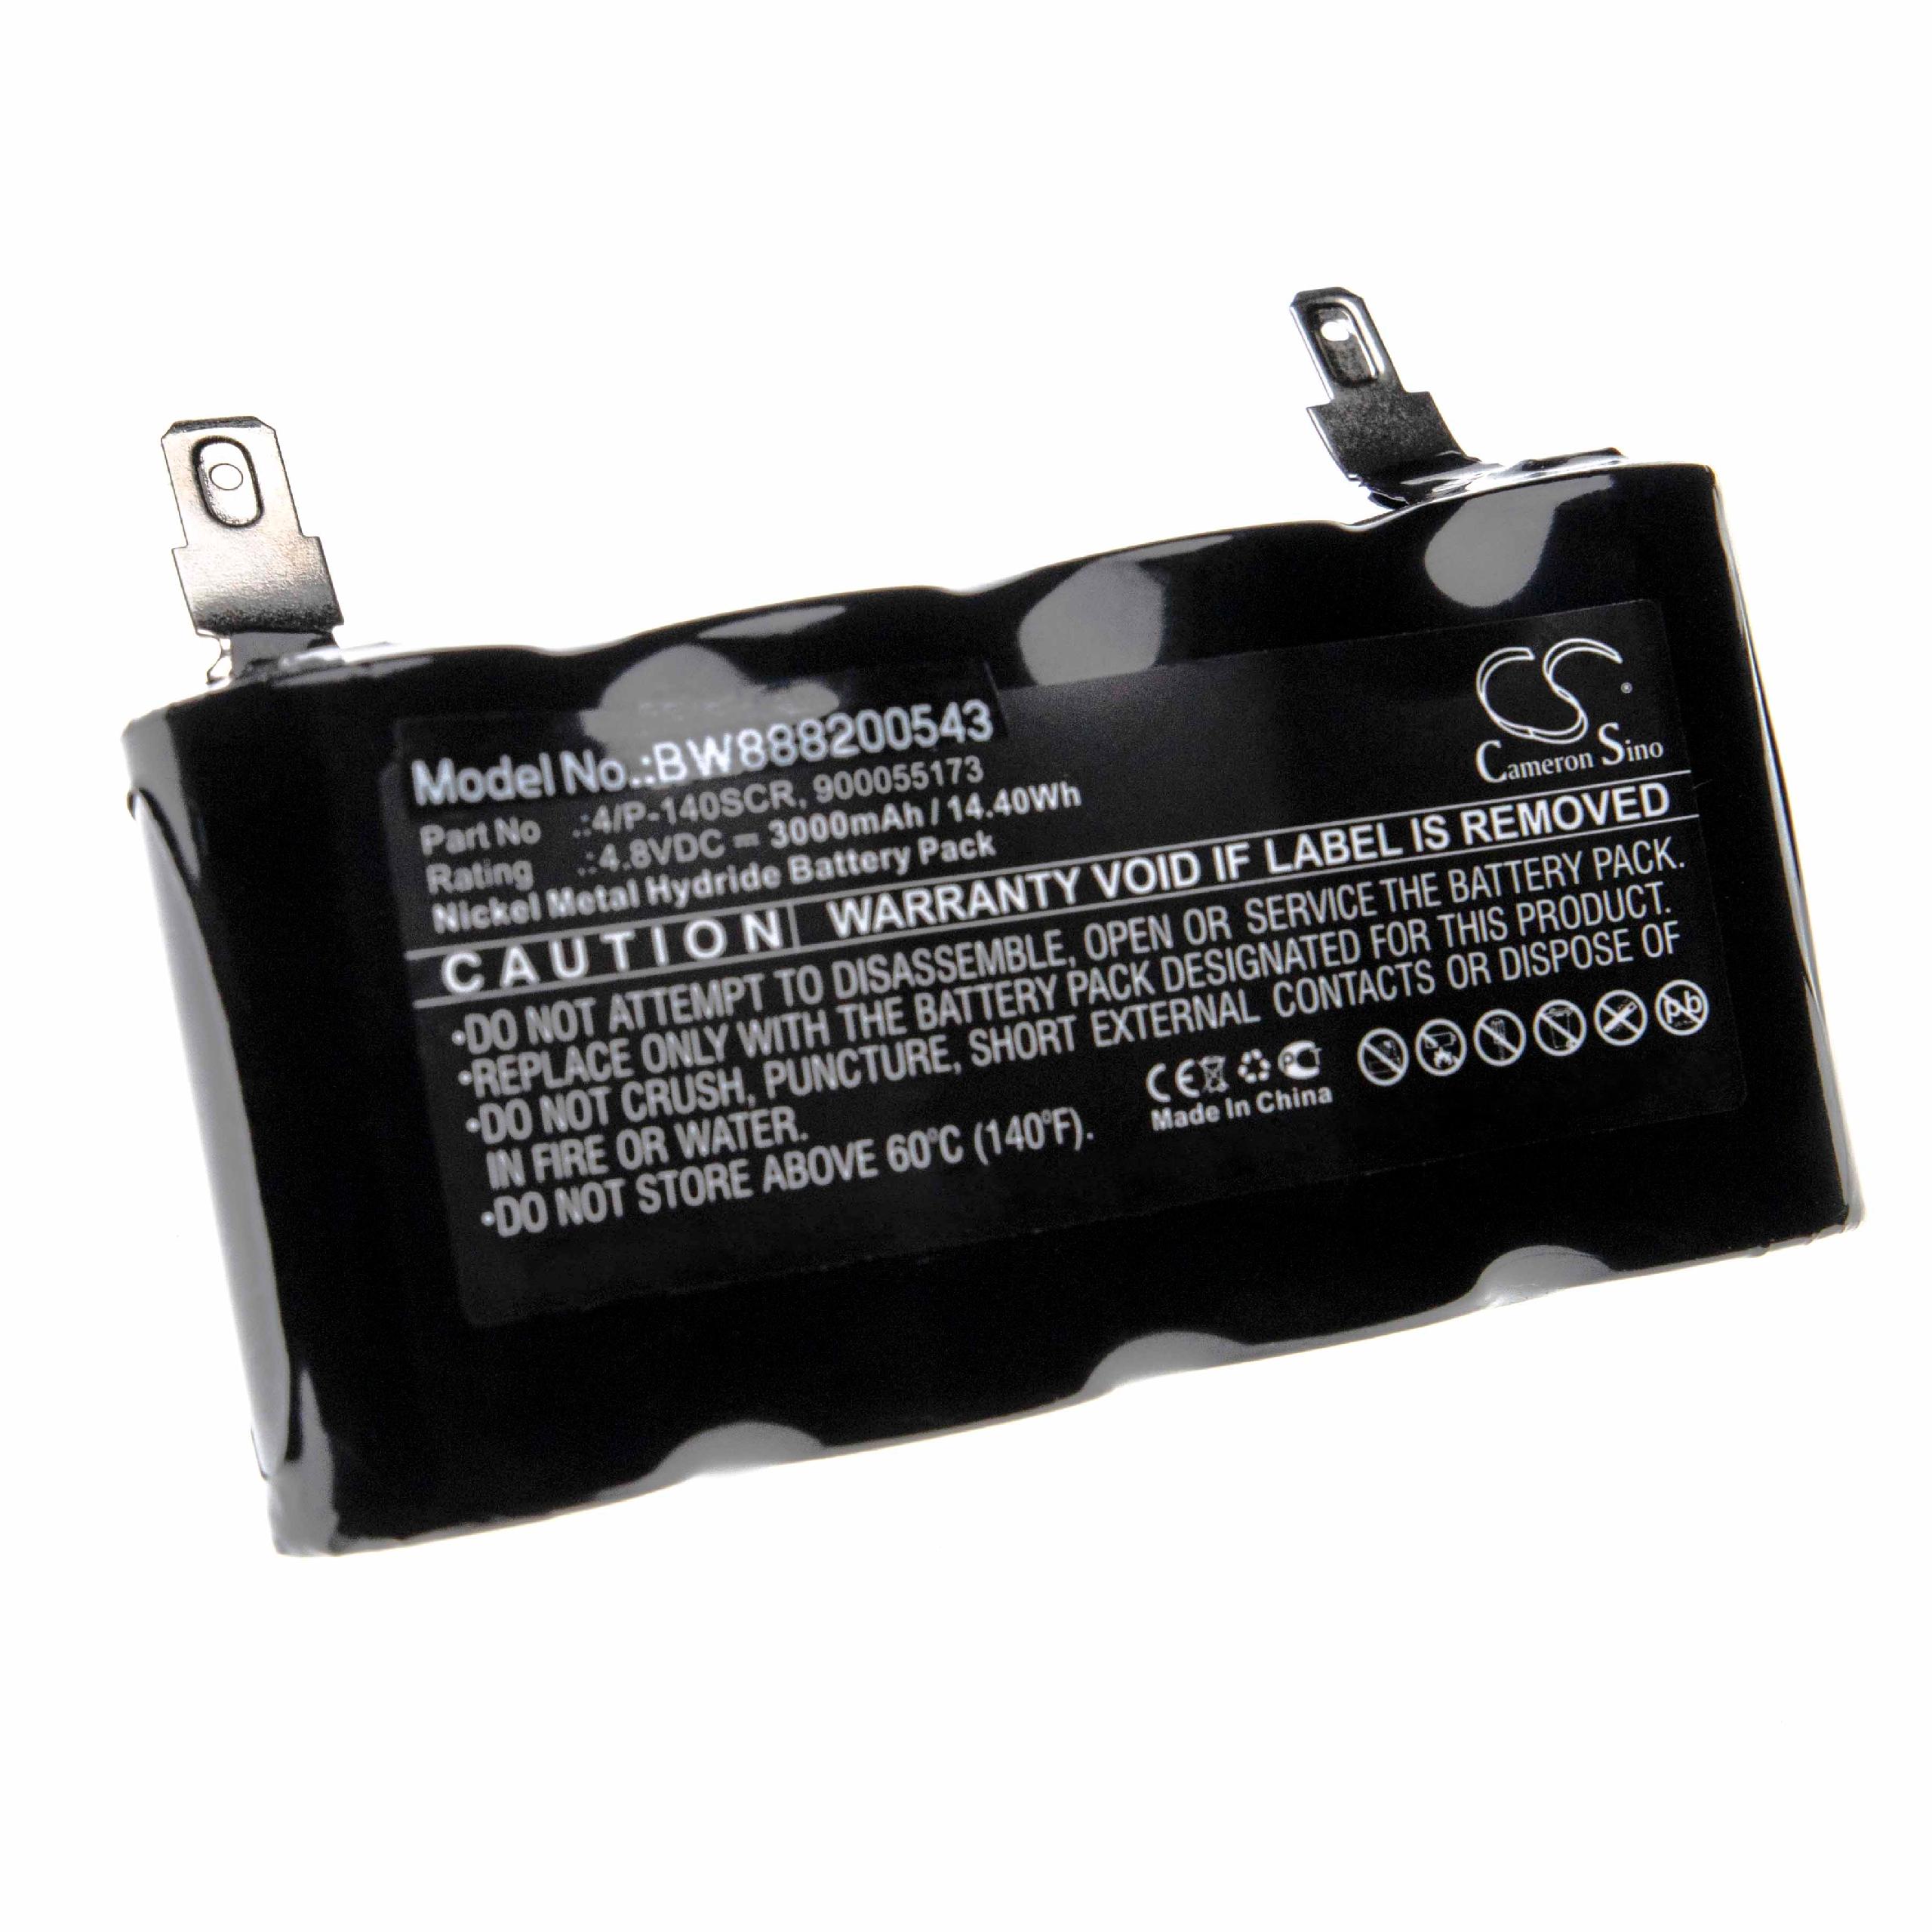 Battery Replacement for Electrolux 4/P-140SCR, 900055173 for - 3000mAh, 4.8V, NiMH